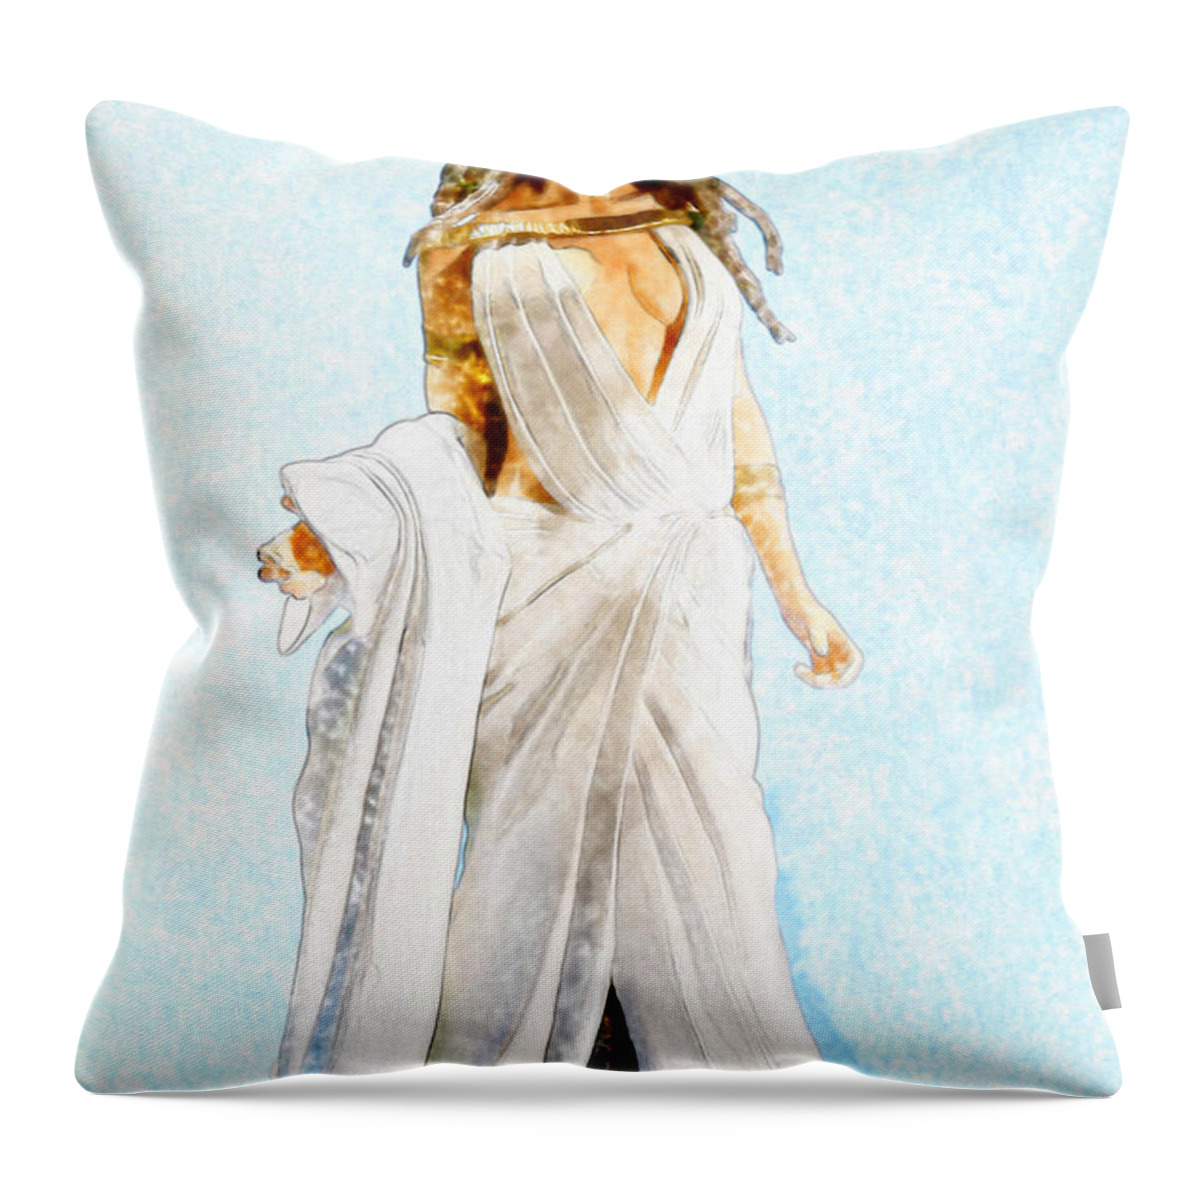 Toy Throw Pillow featuring the photograph The Queen by David Stasiak